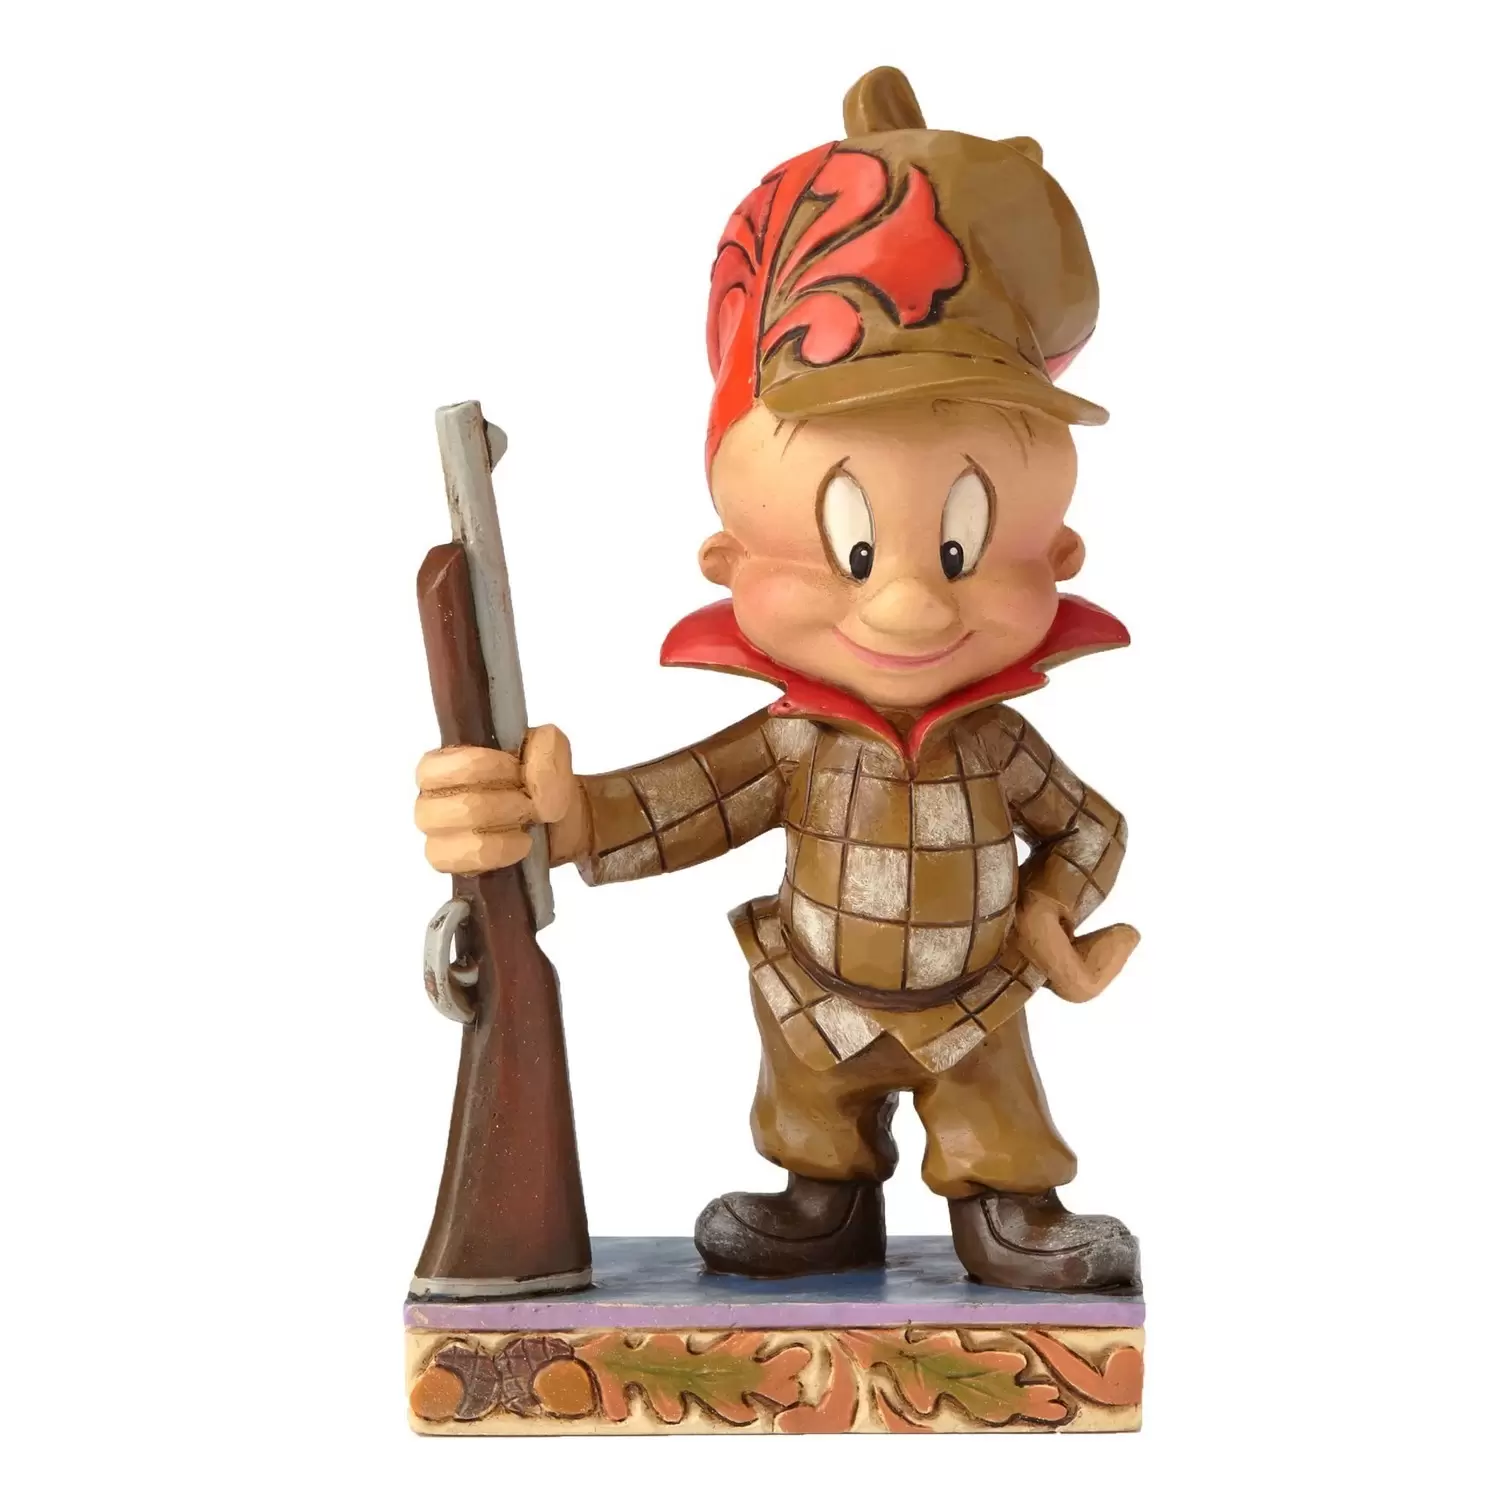 Looney Tunes characters by Jim Shore - Happy Hunter - Hunter Elmer Fudd Personality Pose